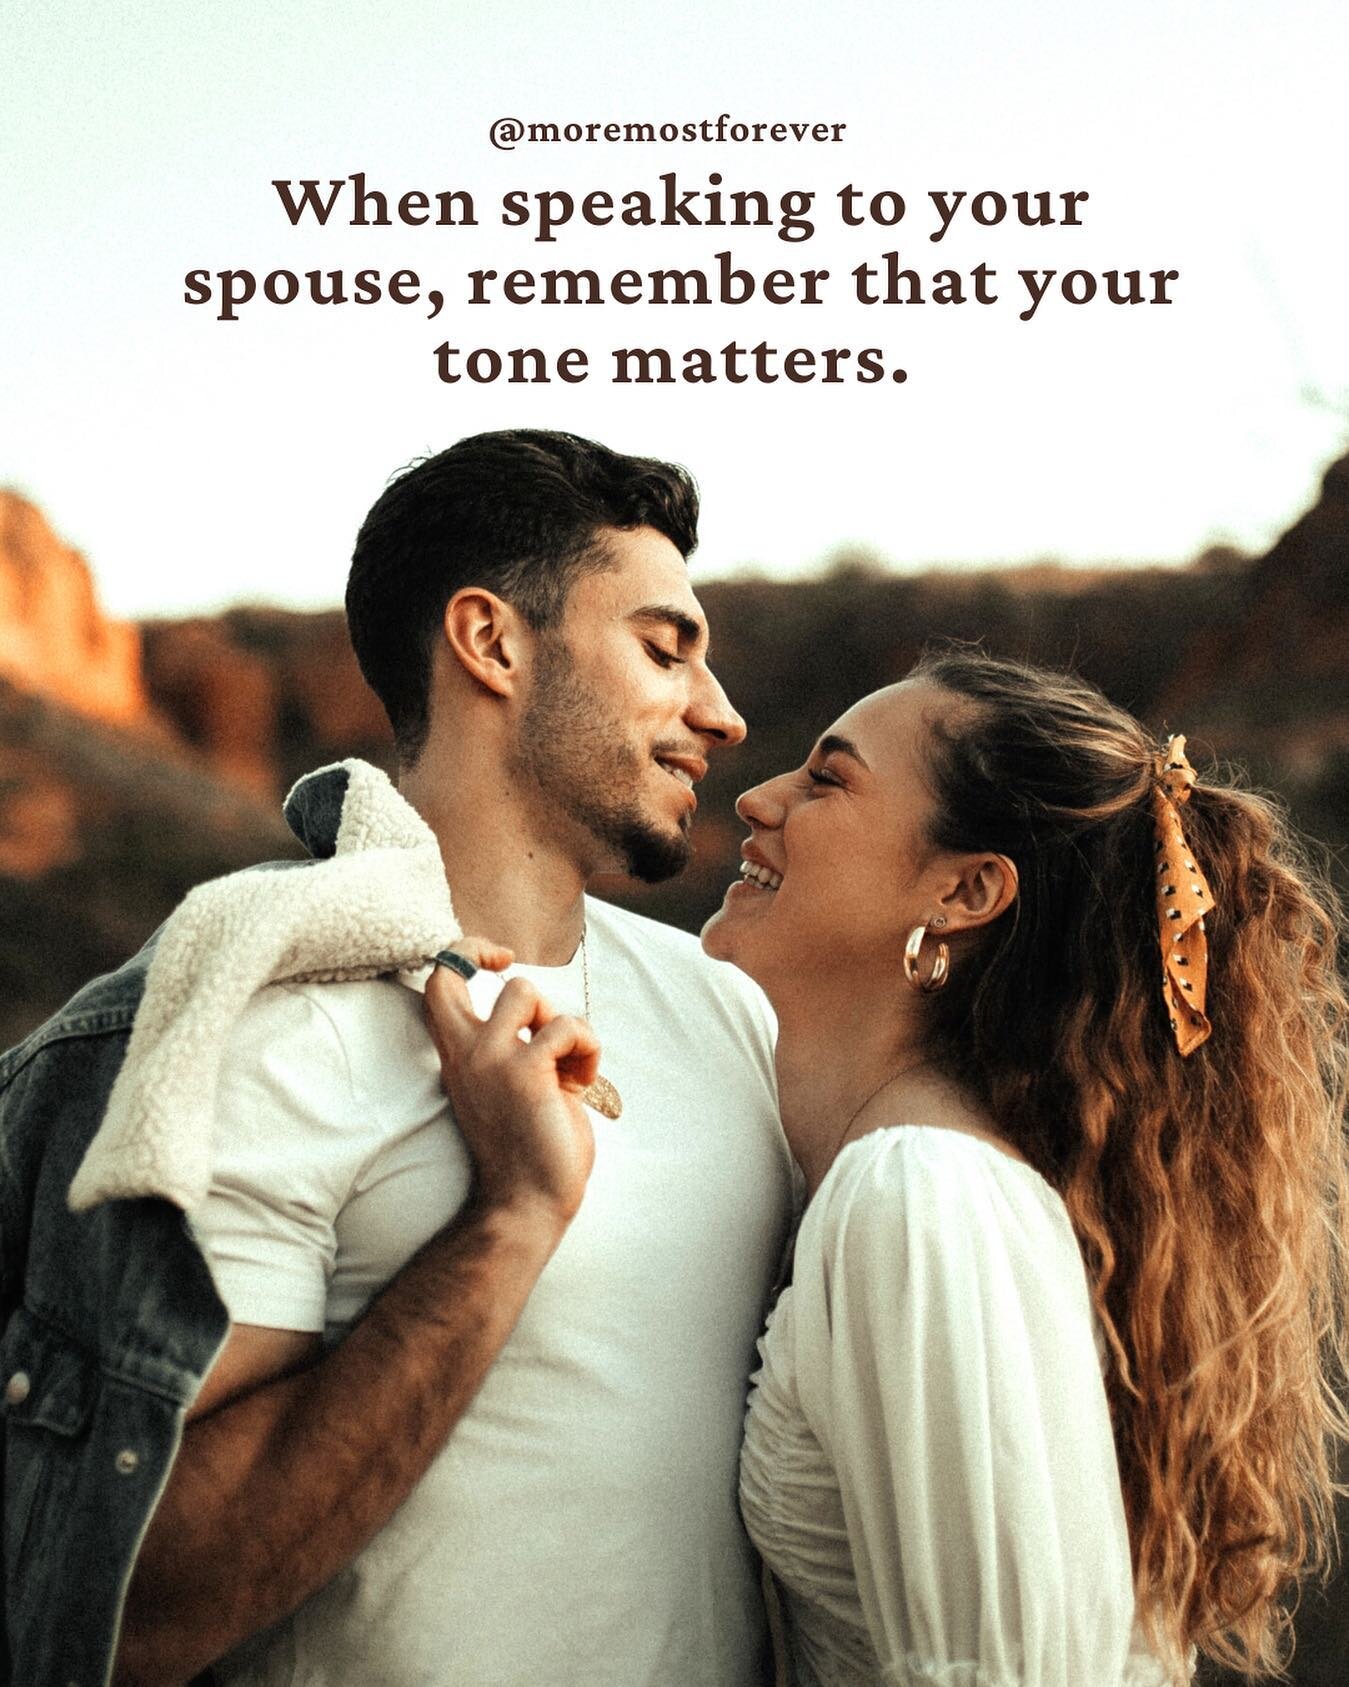 It&rsquo;s not what you say, sometimes it&rsquo;s just how you say it. Proverbs 15:1 -- &ldquo;A soft word turns away wrath, but a harsh word stirs up anger.&rdquo; 

#datingadvice #marriageadvice #marriagewisdom #marriageaftergod #godlydating #godly